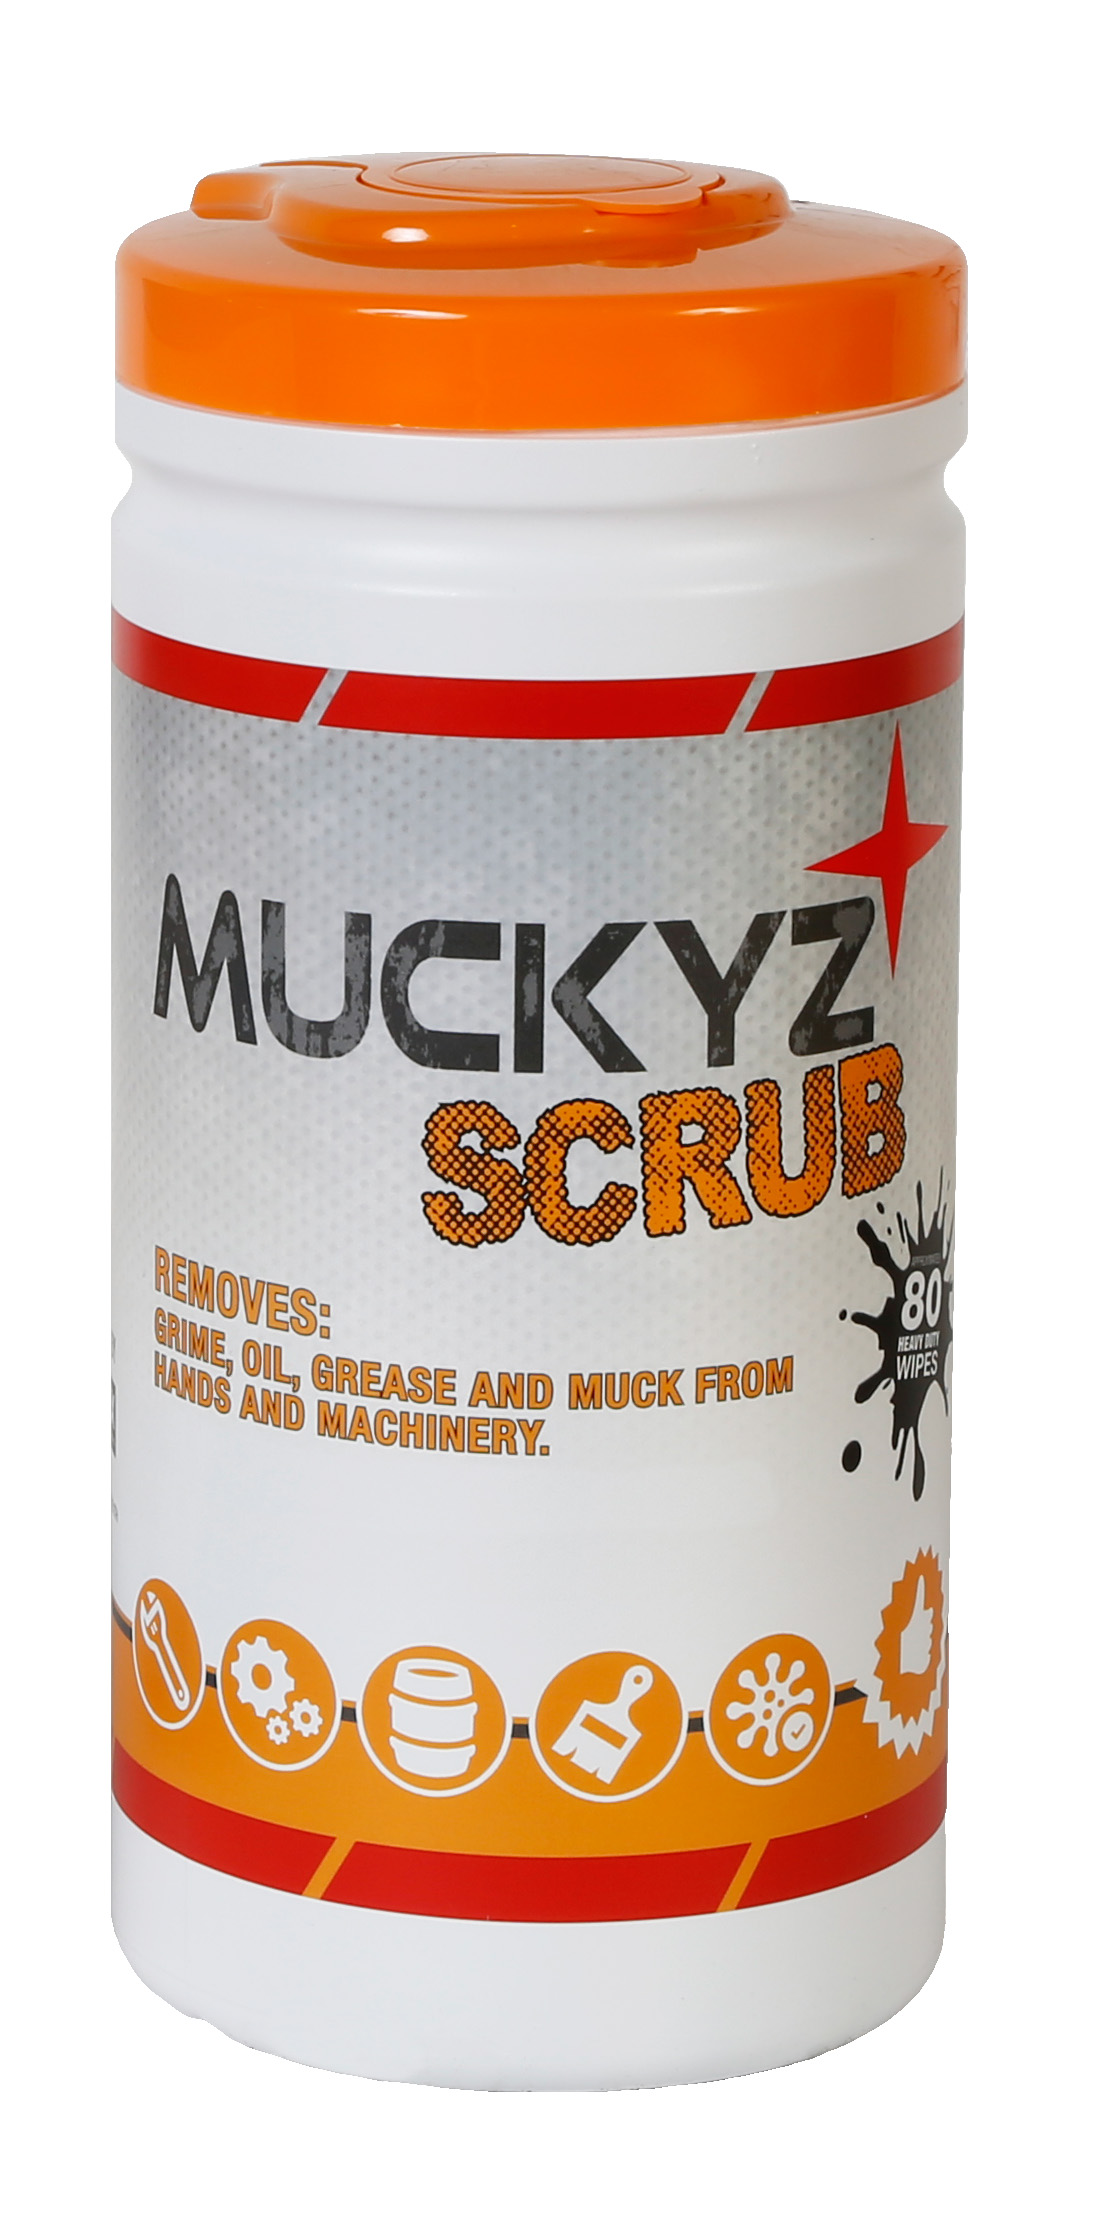 Case of 12 x 2litre tubs of 80 Muckyz Scrub Wipes